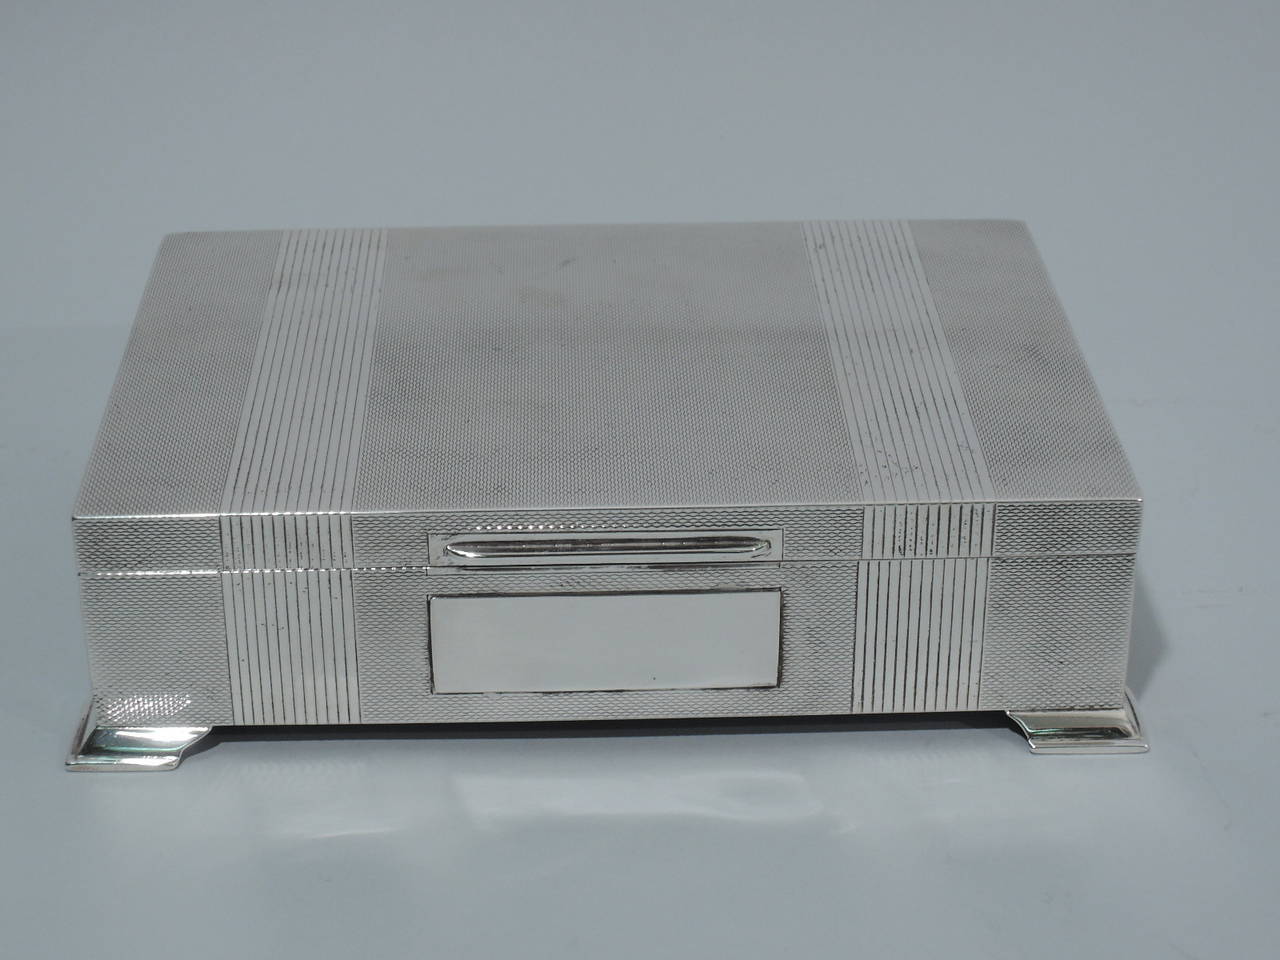 Elizabeth II sterling silver desk box. Made by Harman Bros. in Birmingham in 1958. Rectangular with spread bracket feet at corners. Cover is hinged and flat with tab. Allover engine-turned pattern. On cover are two reeded bands that wrap around to